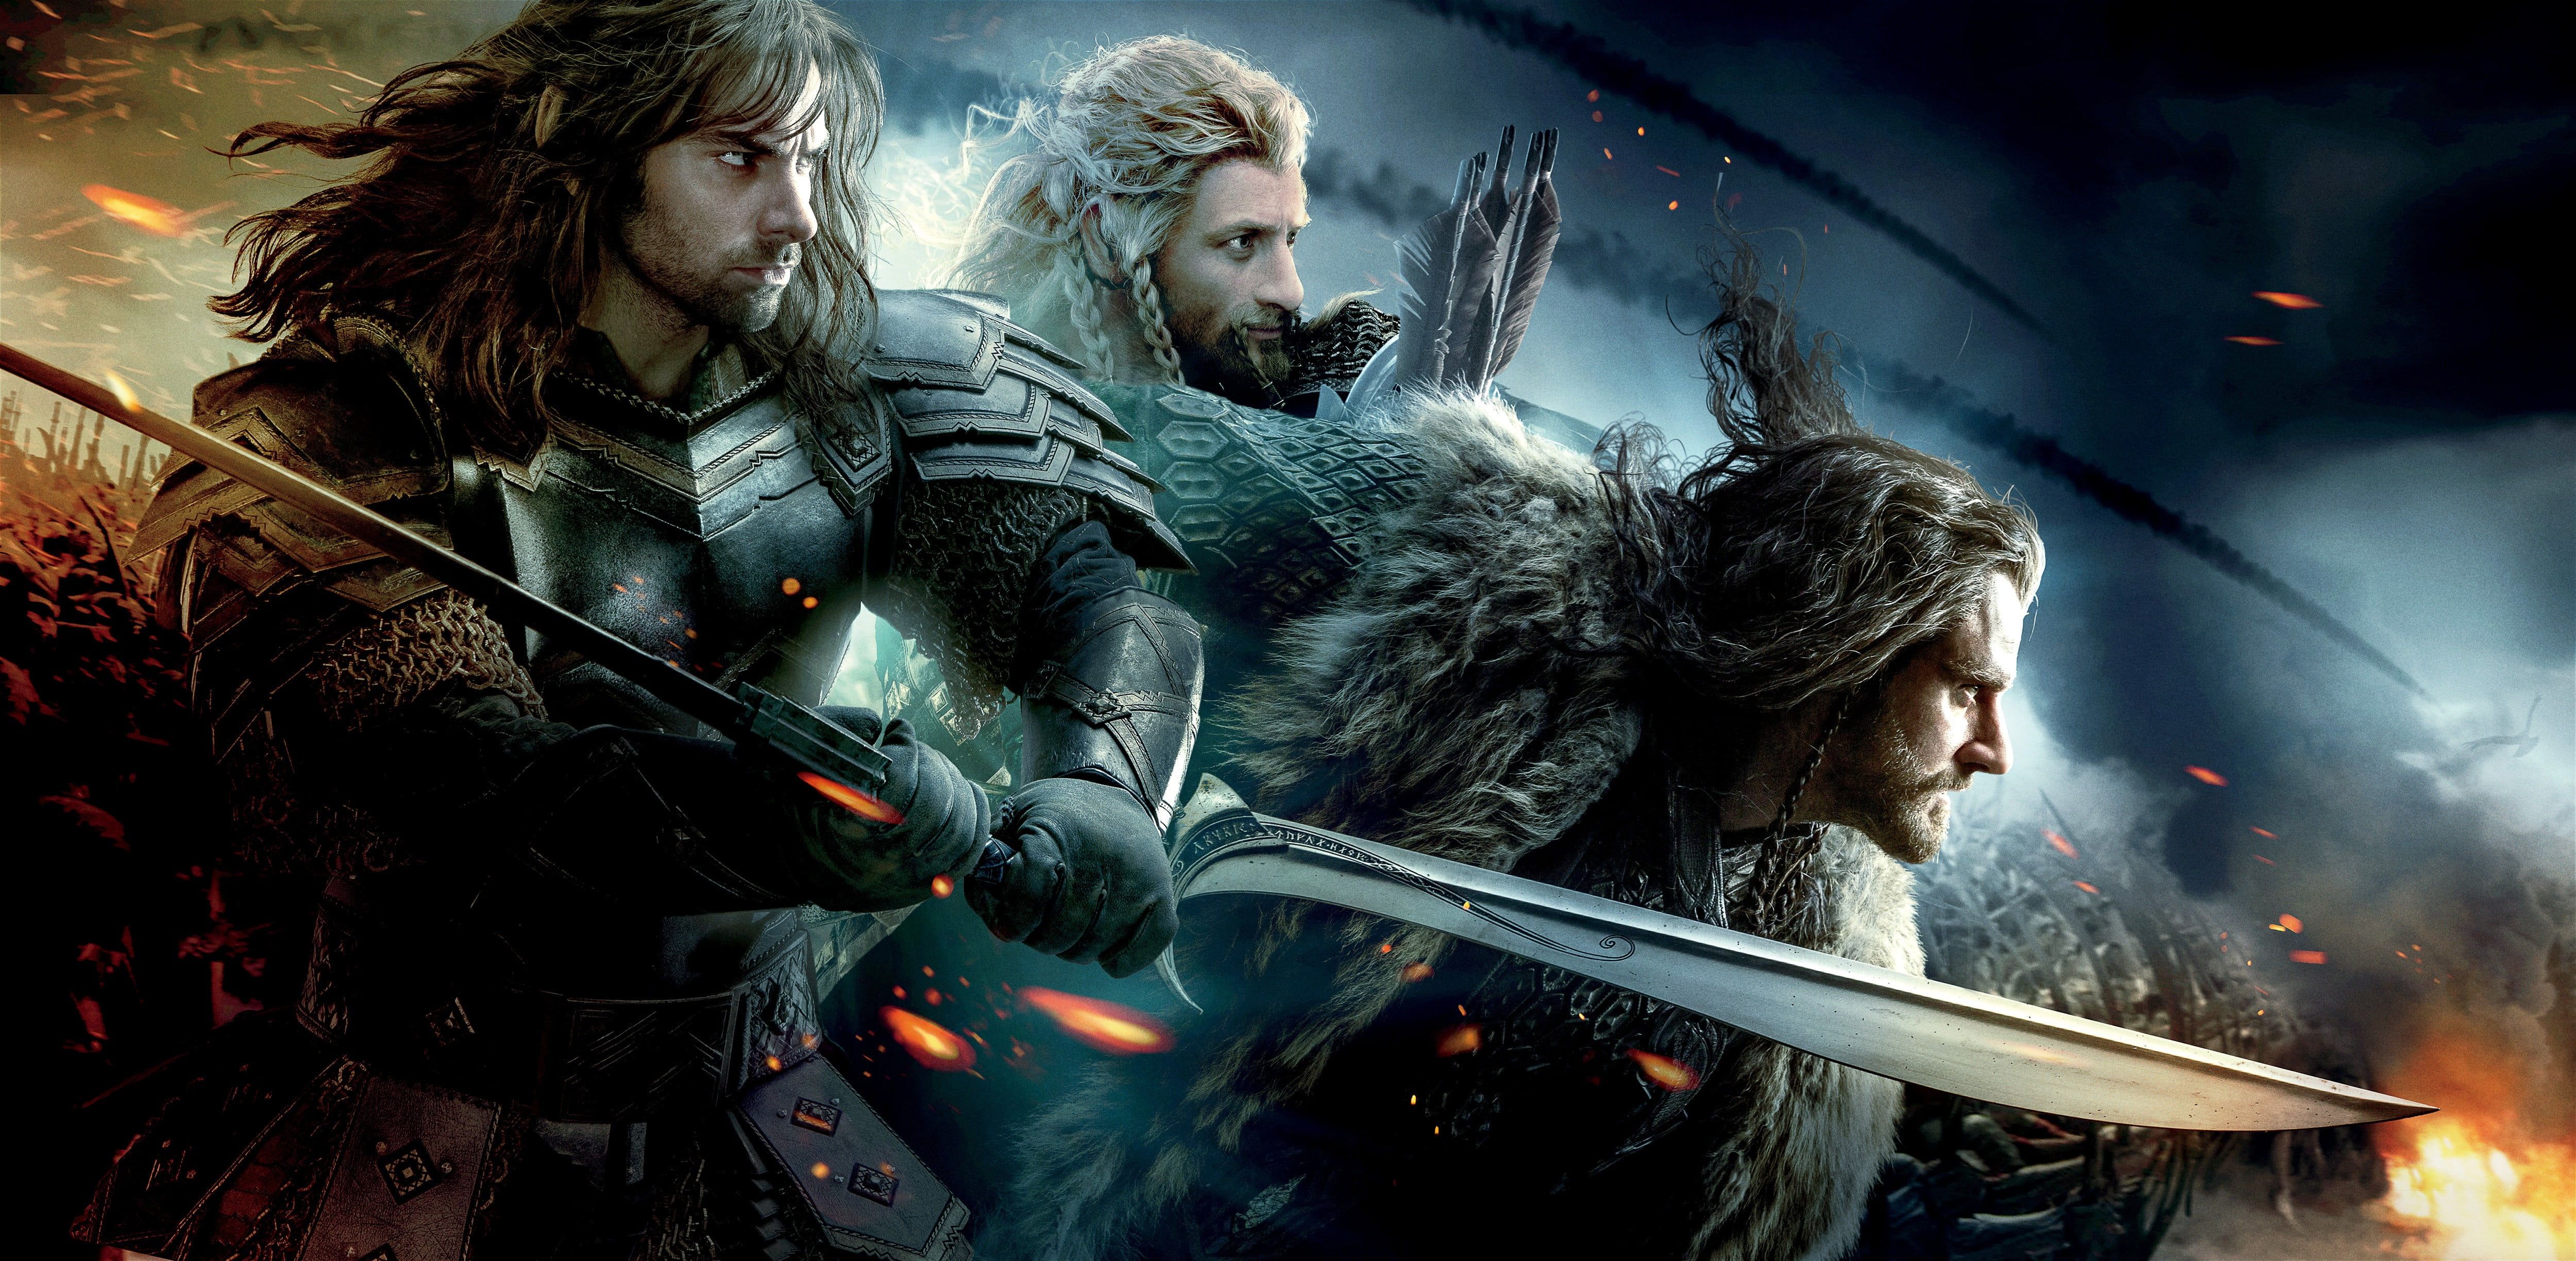 The lord of the rings digital wallpaper movies the hobbit the hobbit the battle of the five armies thorin oakâ the hobbit the hobbit movies thorin oakenshield